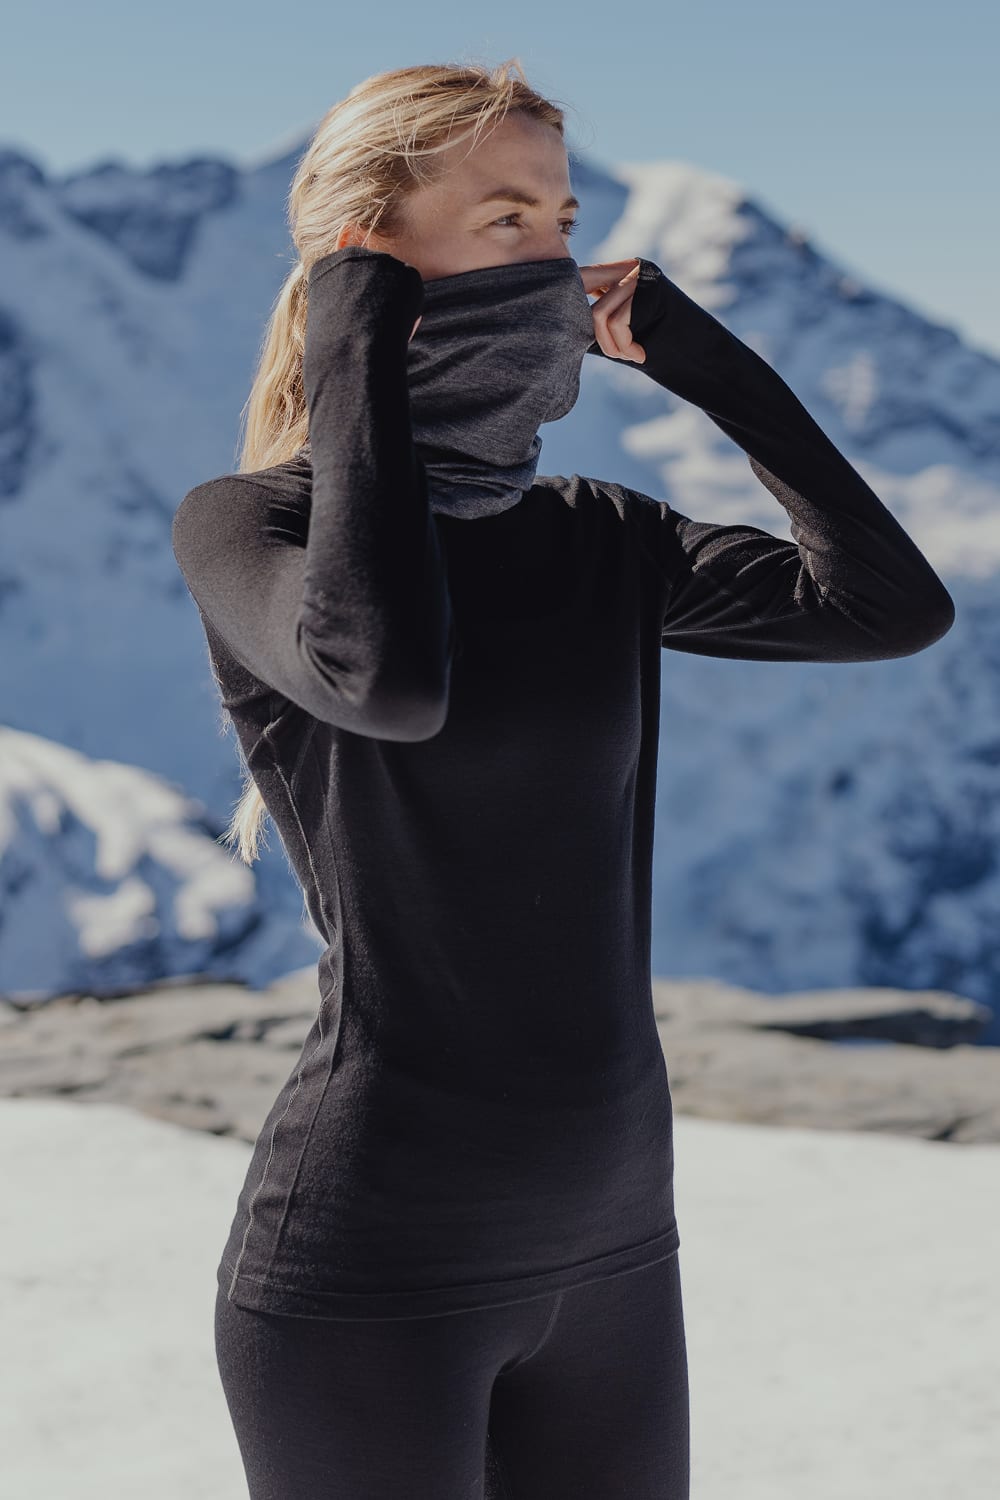 A women wearing black Oasis base layer stands on the mountain.